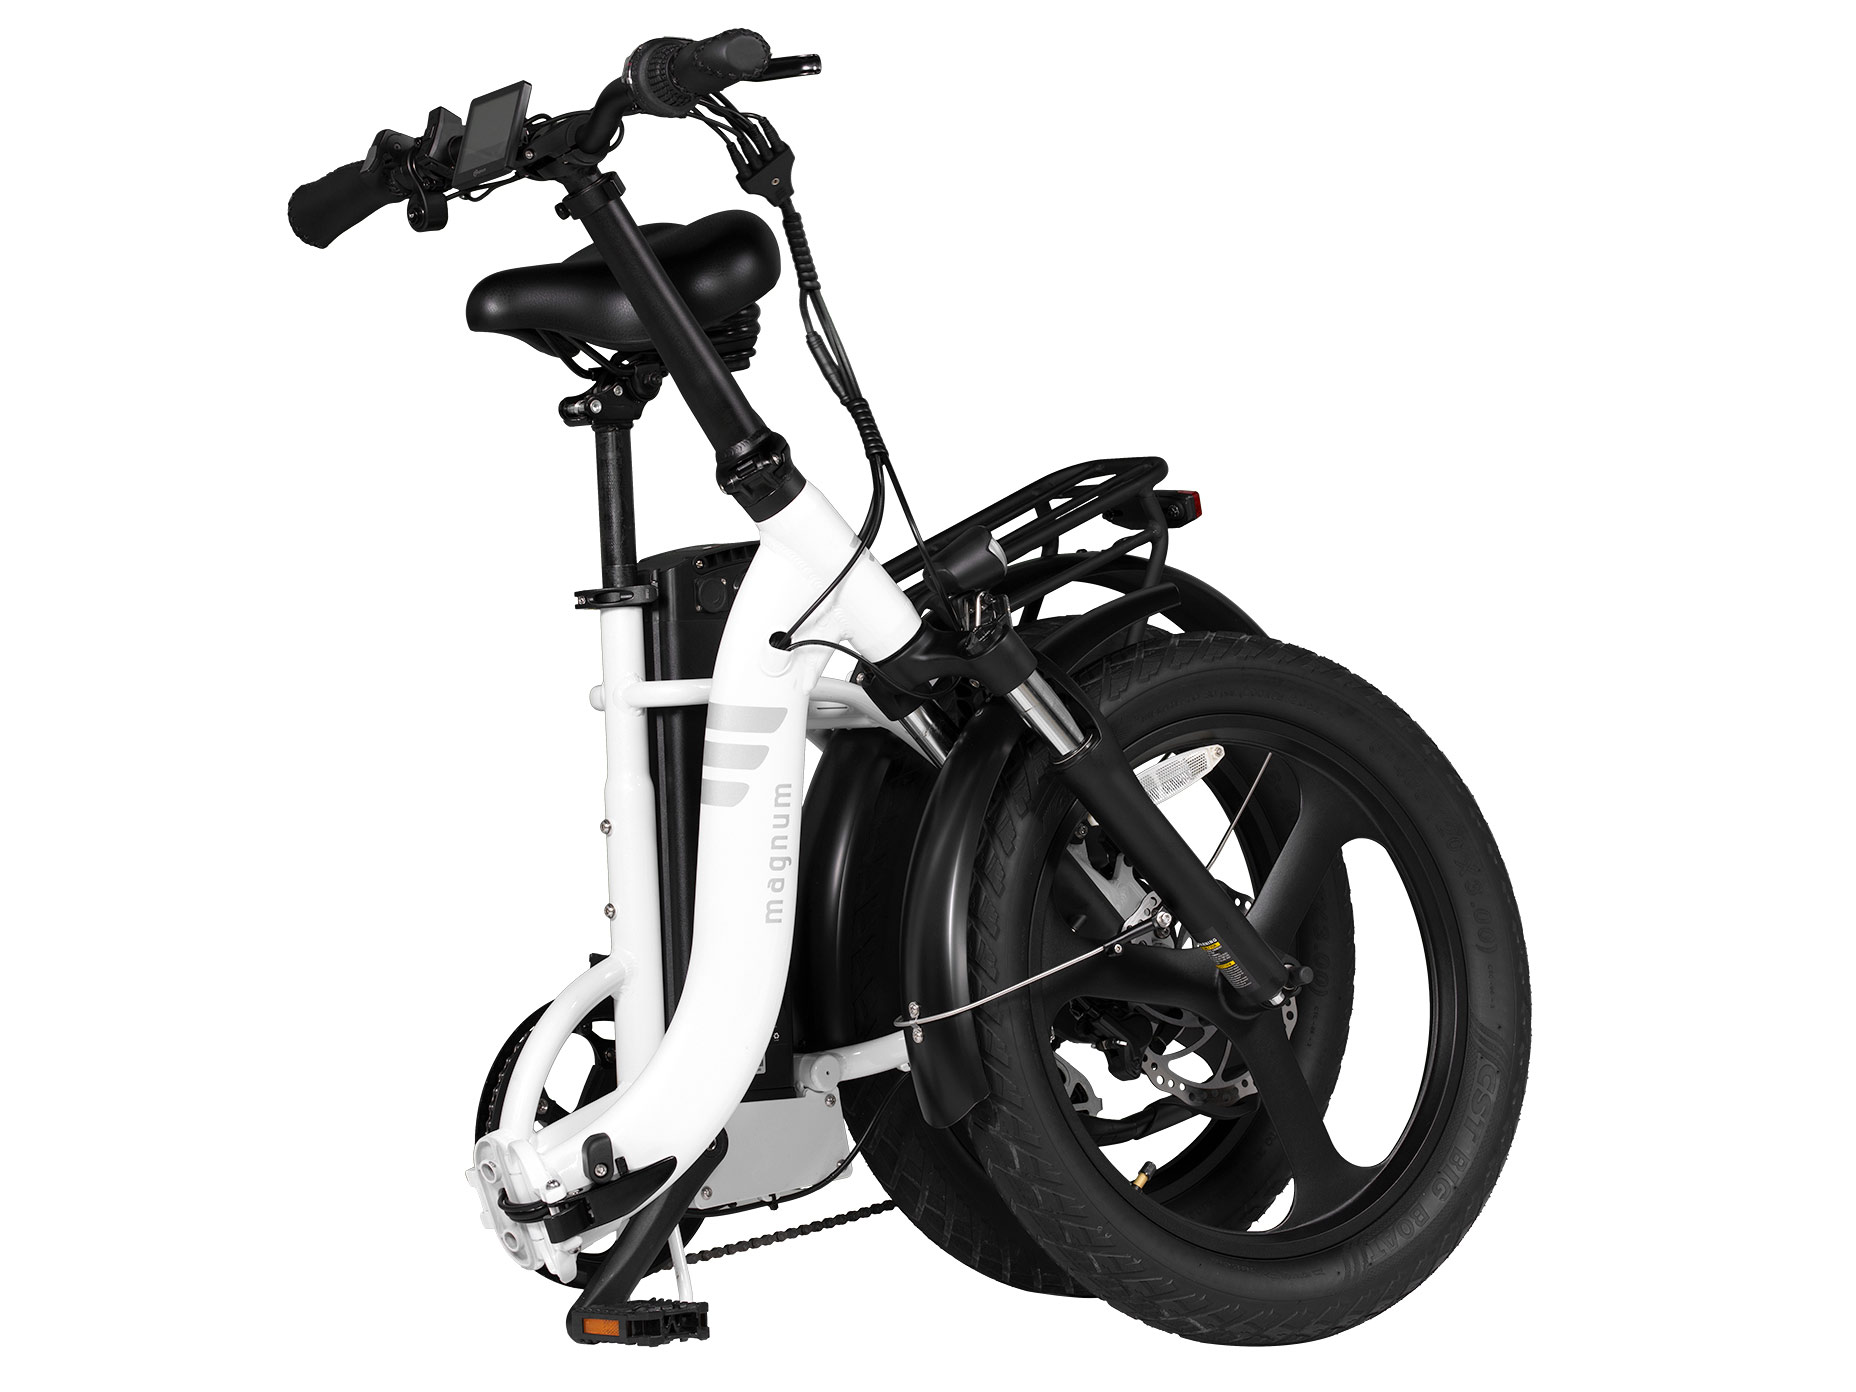 The bike in its semi-folded form—the handlebar and pedals also fold down.